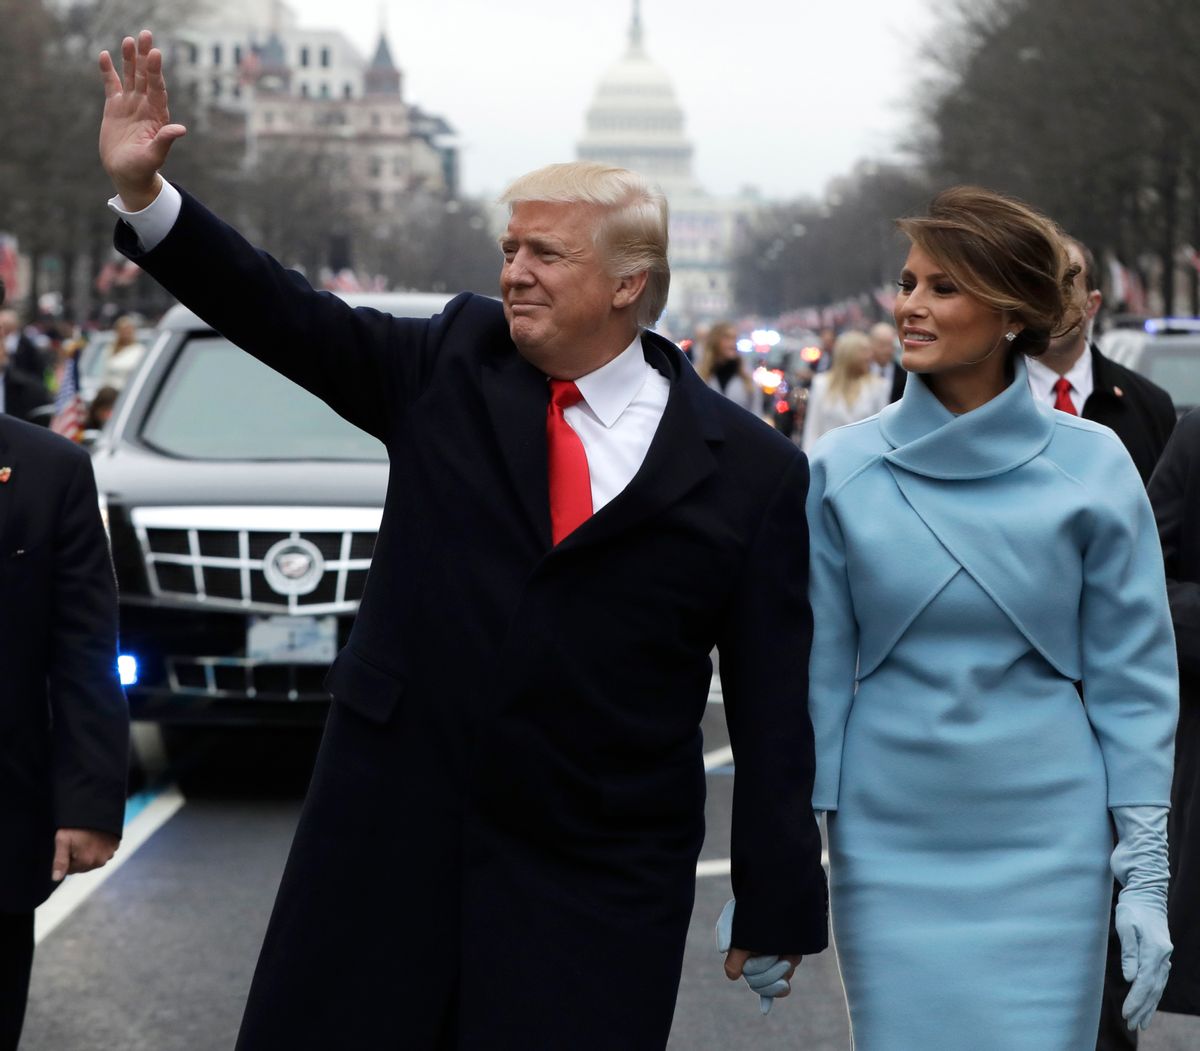 FILE- In this Jan. 20, 2017, file photo, President Donald Trump waves as he walks with first lady Melania Trump during the inauguration parade on Pennsylvania Avenue in Washington. Trump raised $107 million for his inaugural festivities. Trump’s inaugural committee is due to file information about those donors with the Federal Election Commission and said it would do so on Tuesday, April 18. (AP Photo/Evan Vucci, Pool, File) (AP)